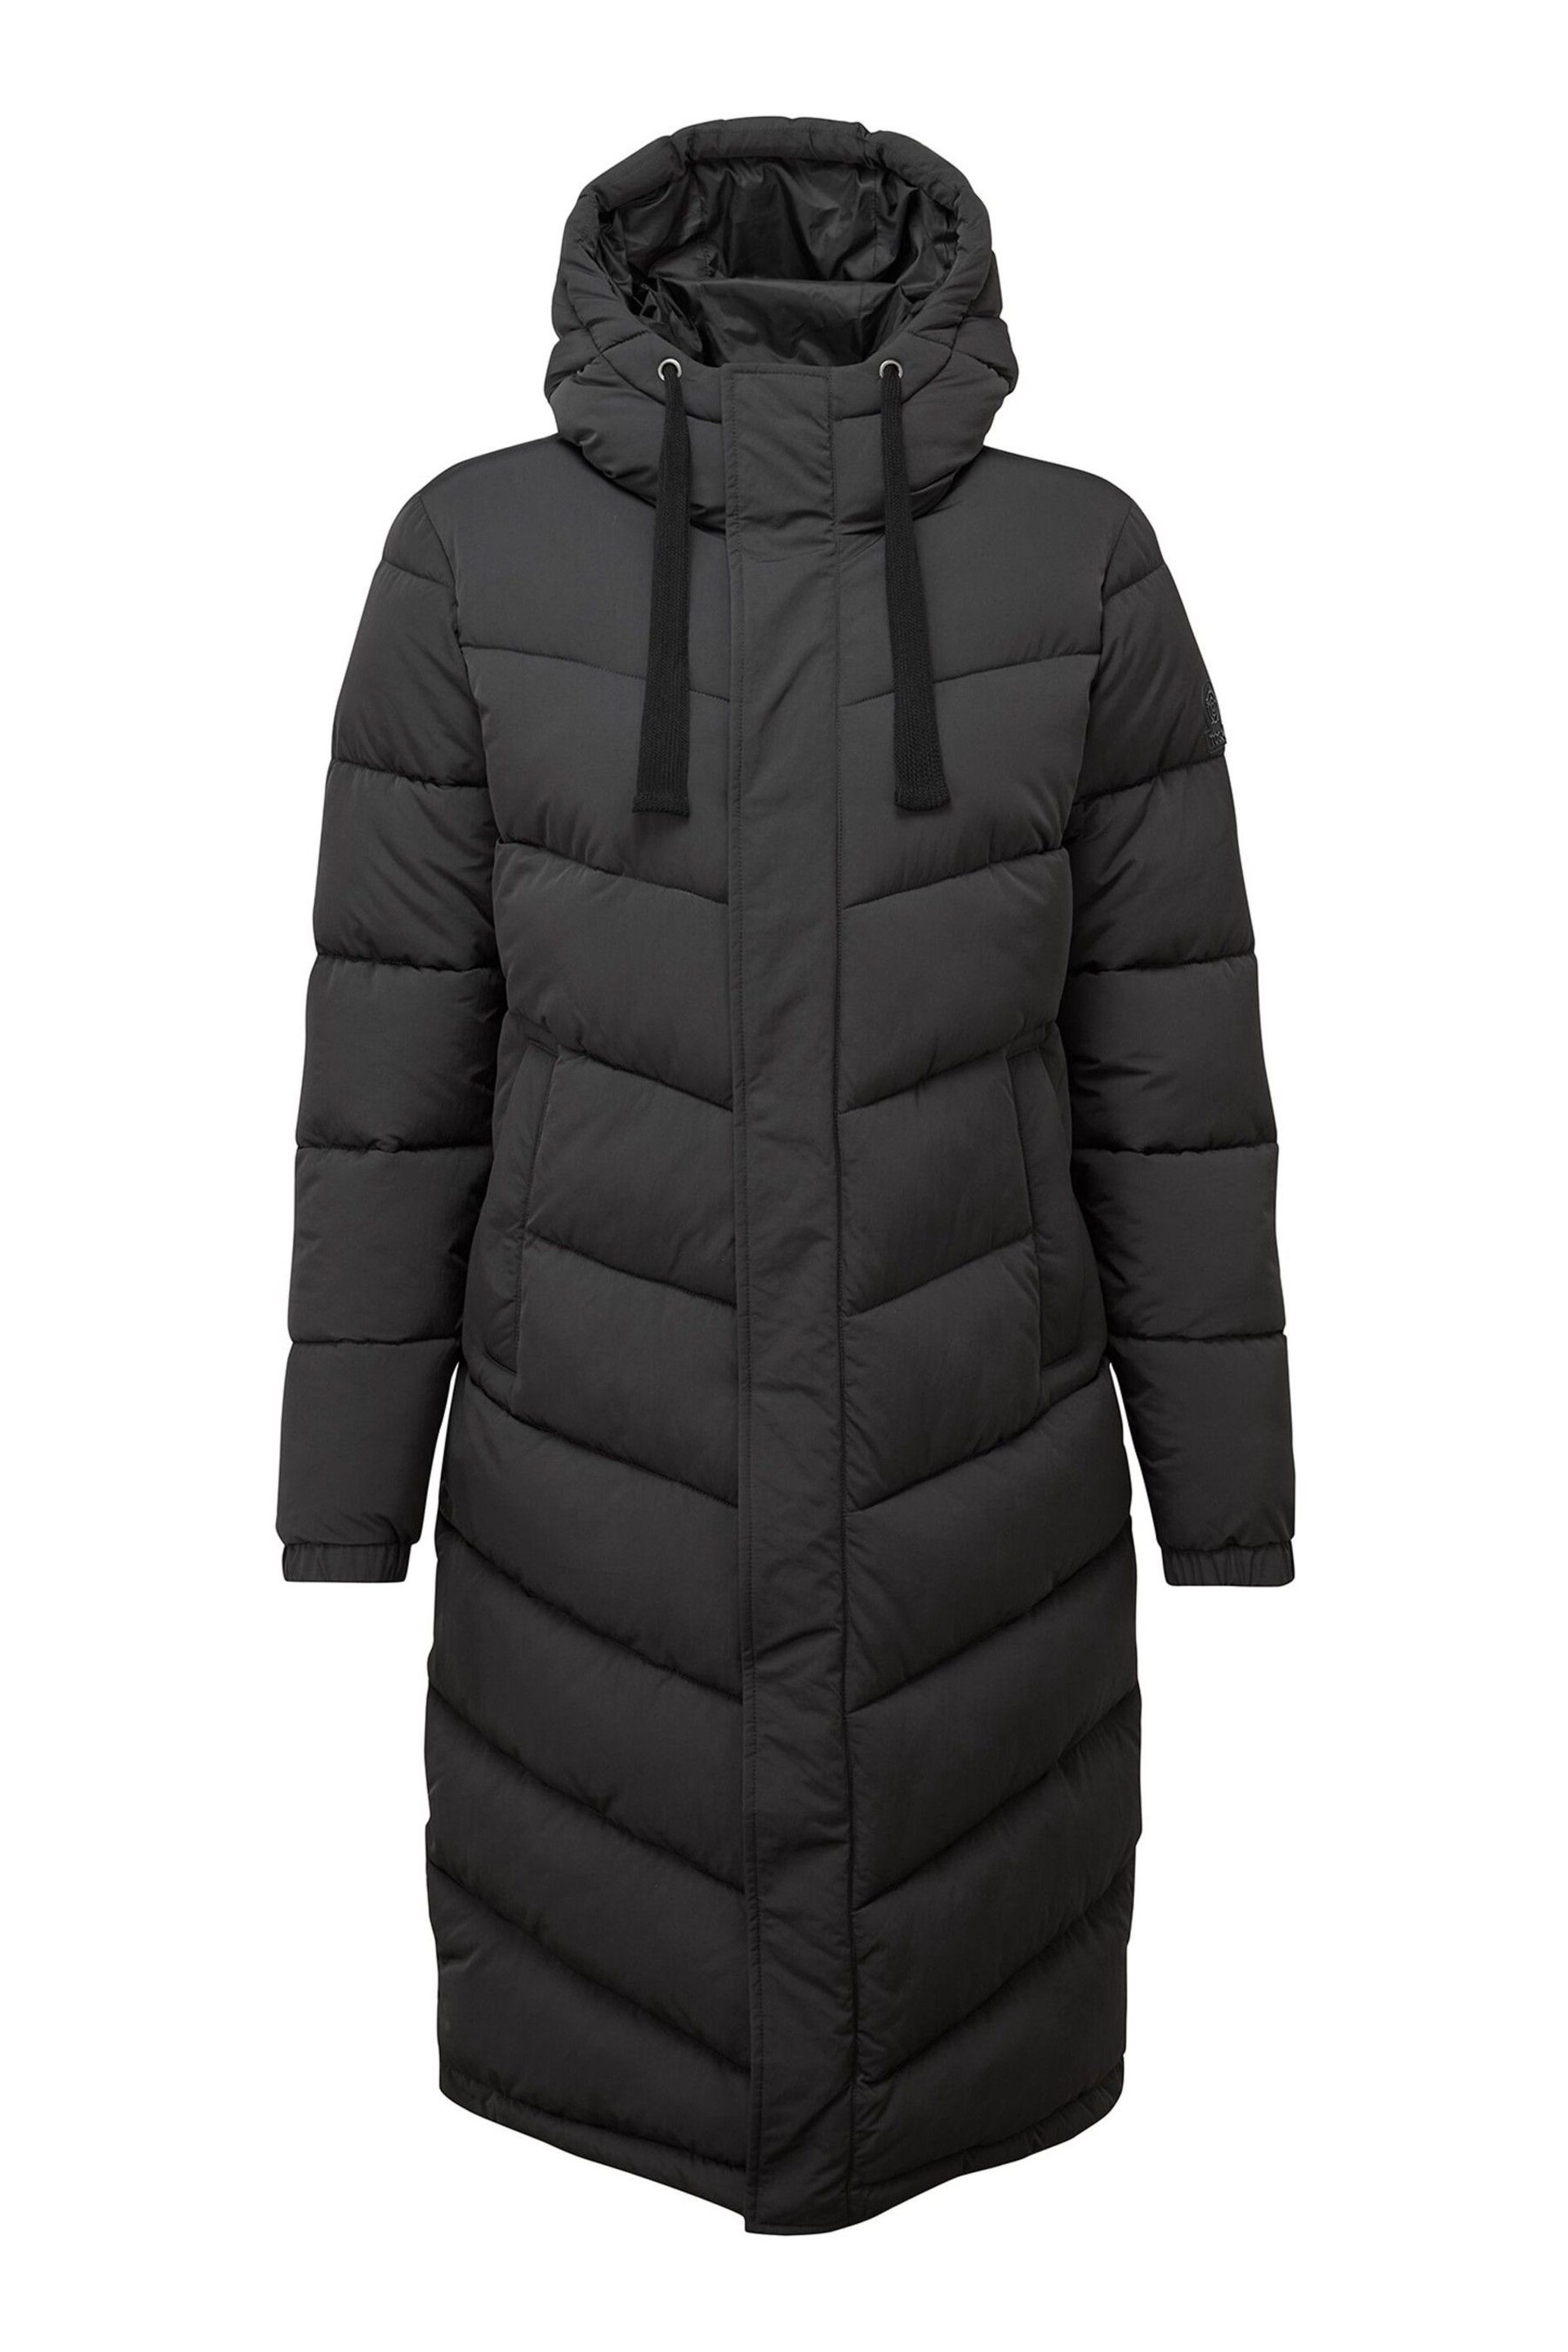 Tog 24 Black Raleigh Thermal Padded Long Coat - Image 6 of 6